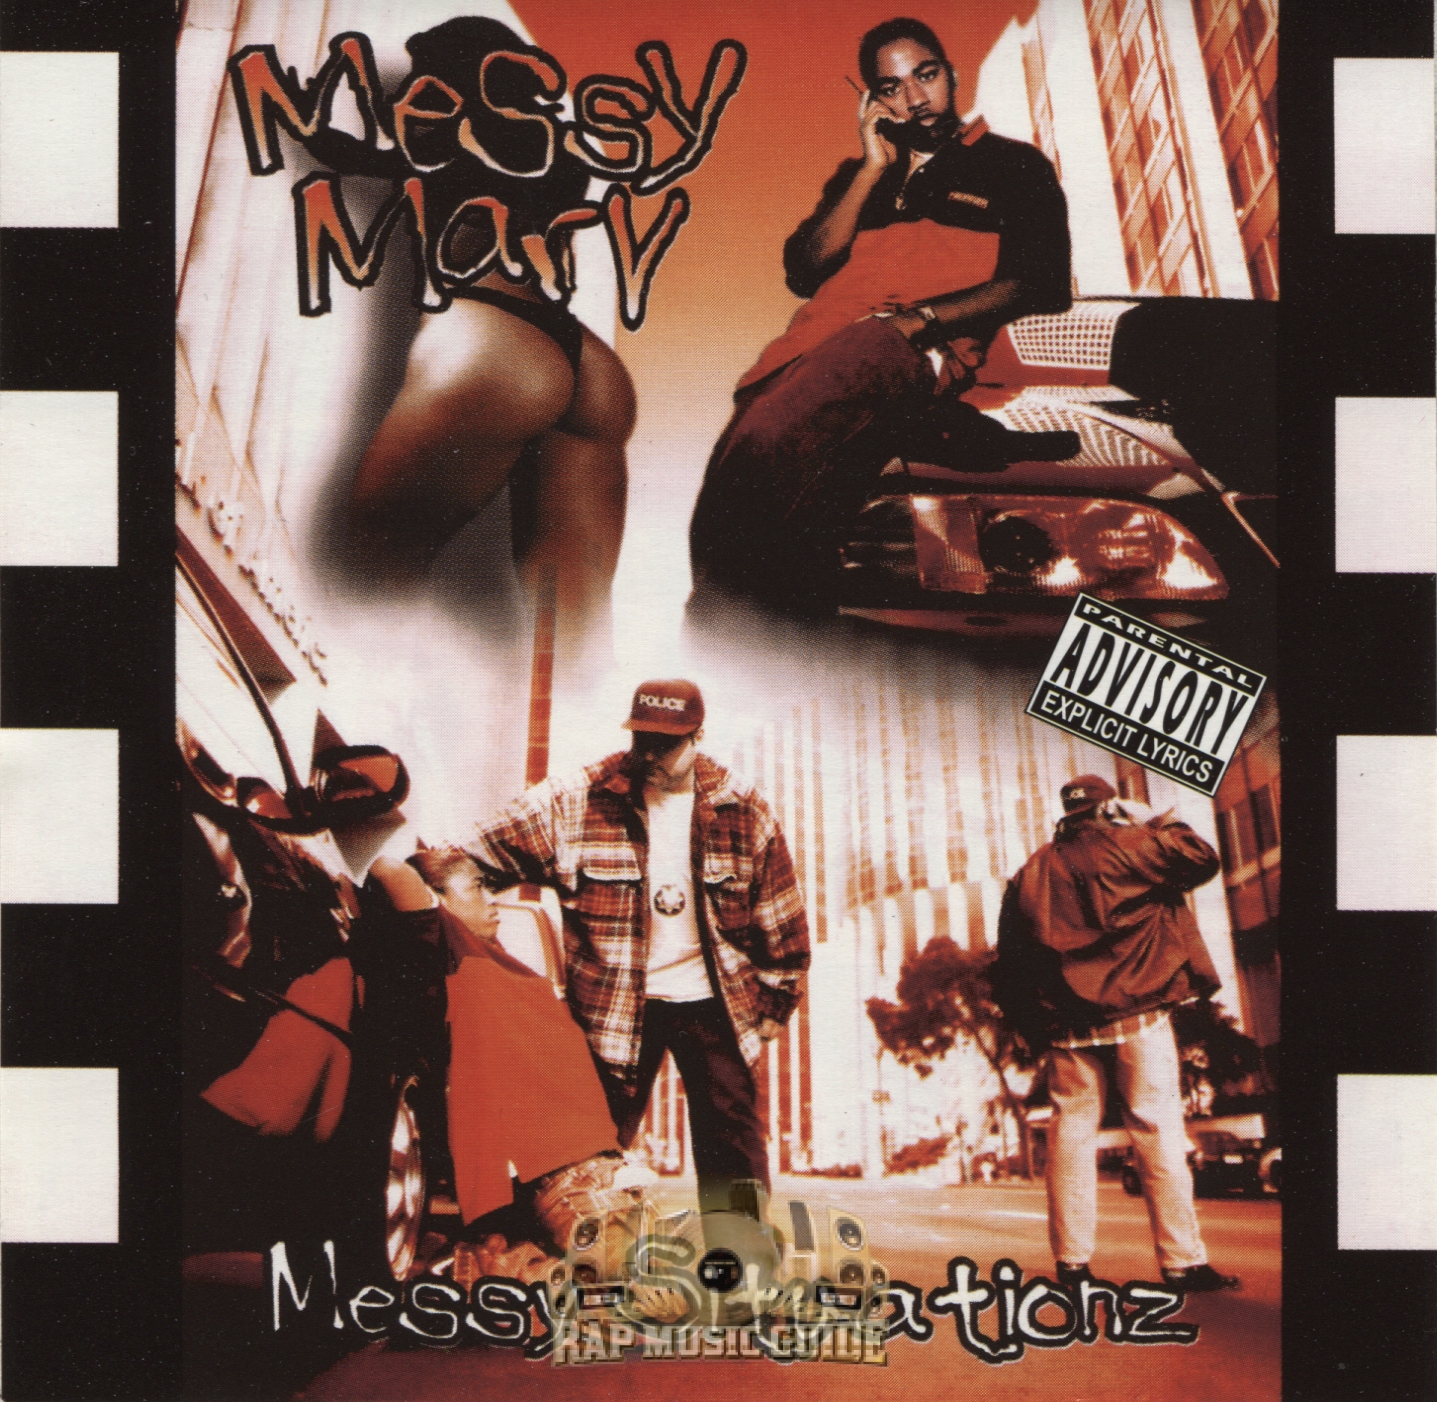 Messy Marv - Messy Situationz: Re-Release. CD | Rap Music Guide